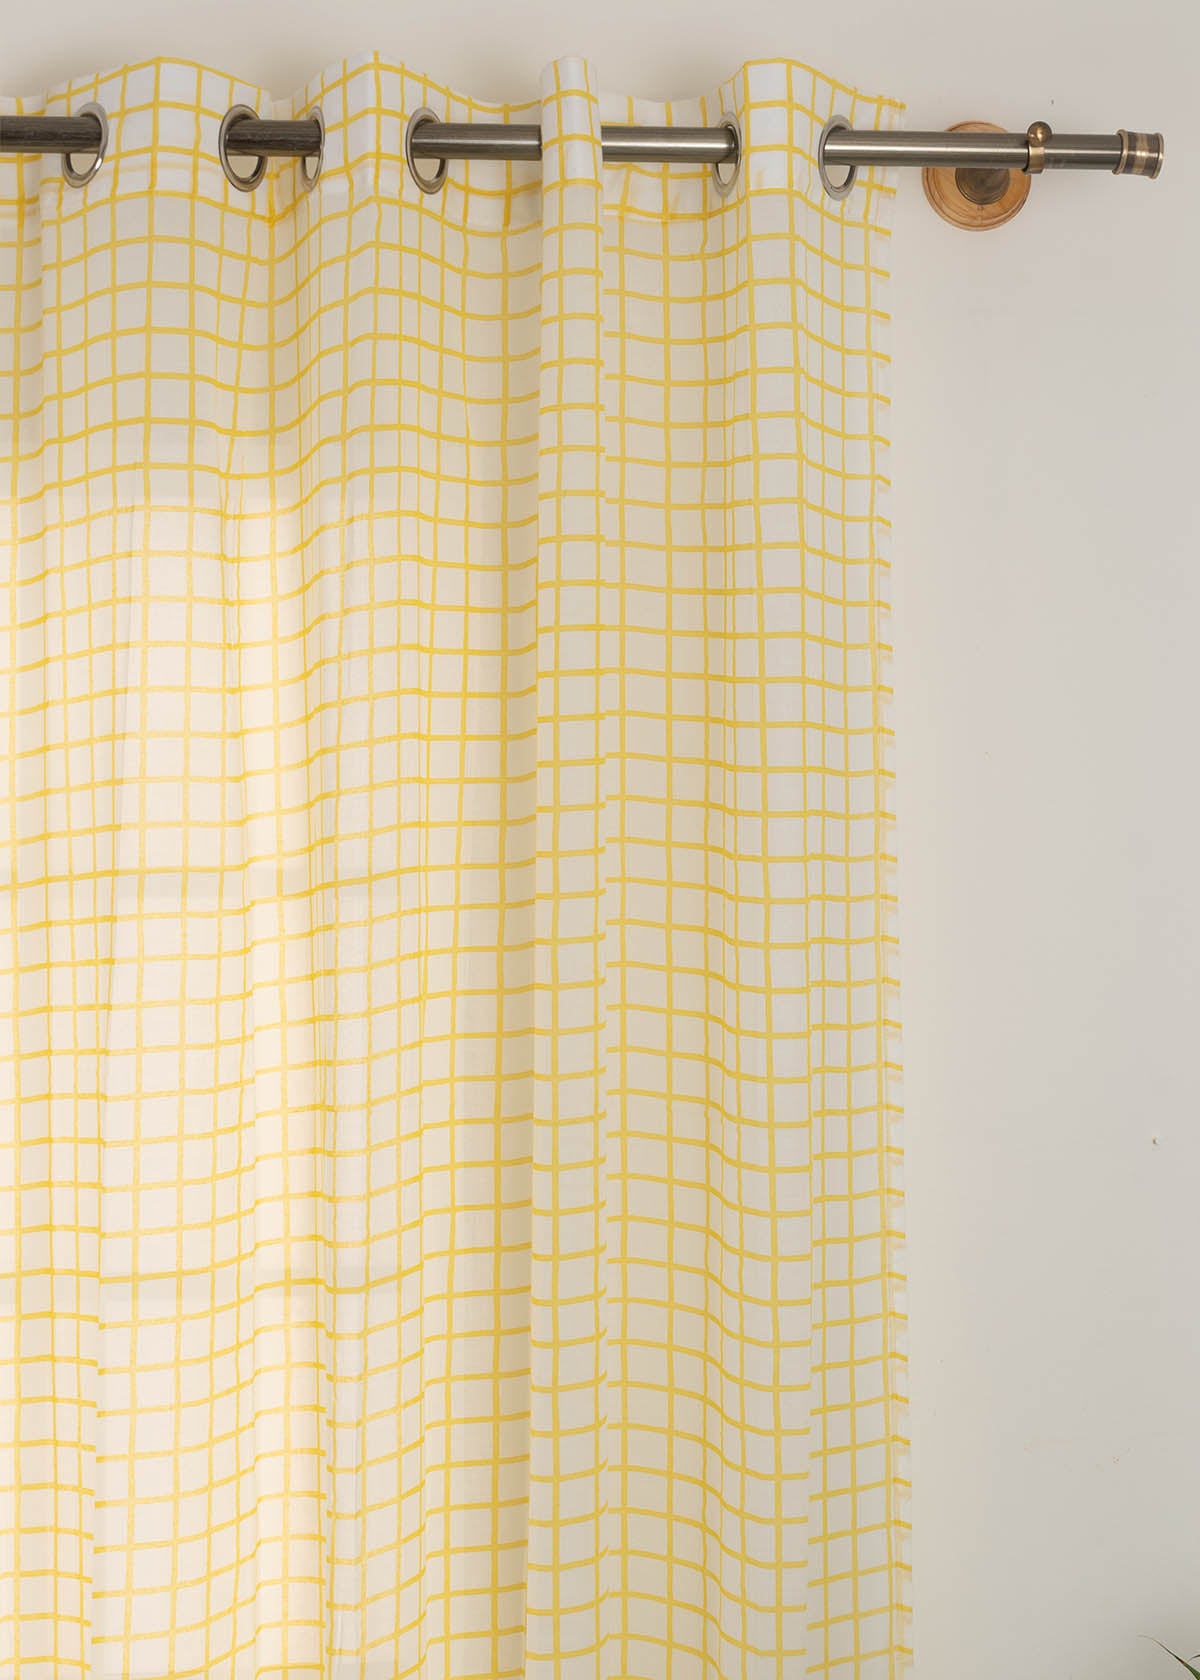 Uneven Checks Geometric 100% Cotton Sheer curtain for Living room & bedroom - Light filtering - Yellow - Pack of 1